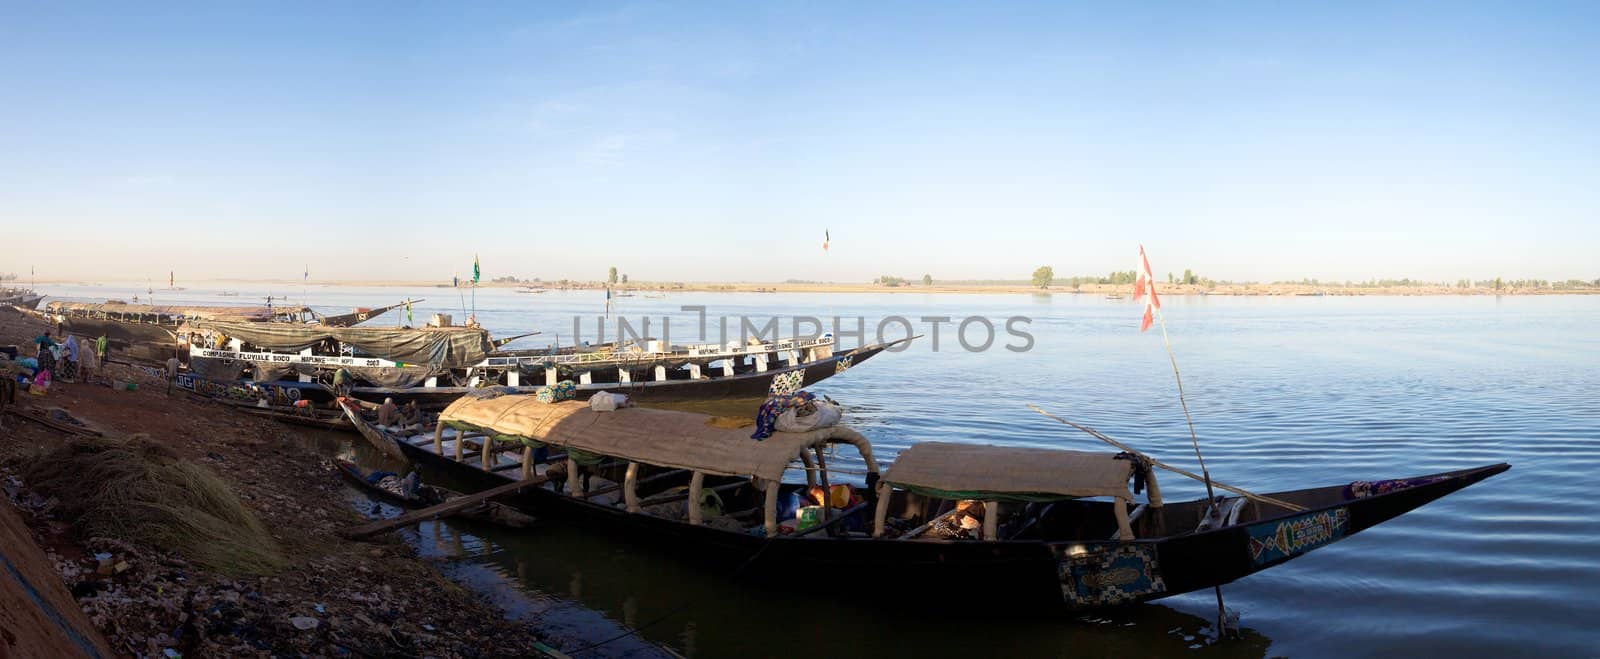 Vessel at the harbor of Mopti on Niger river in Mali